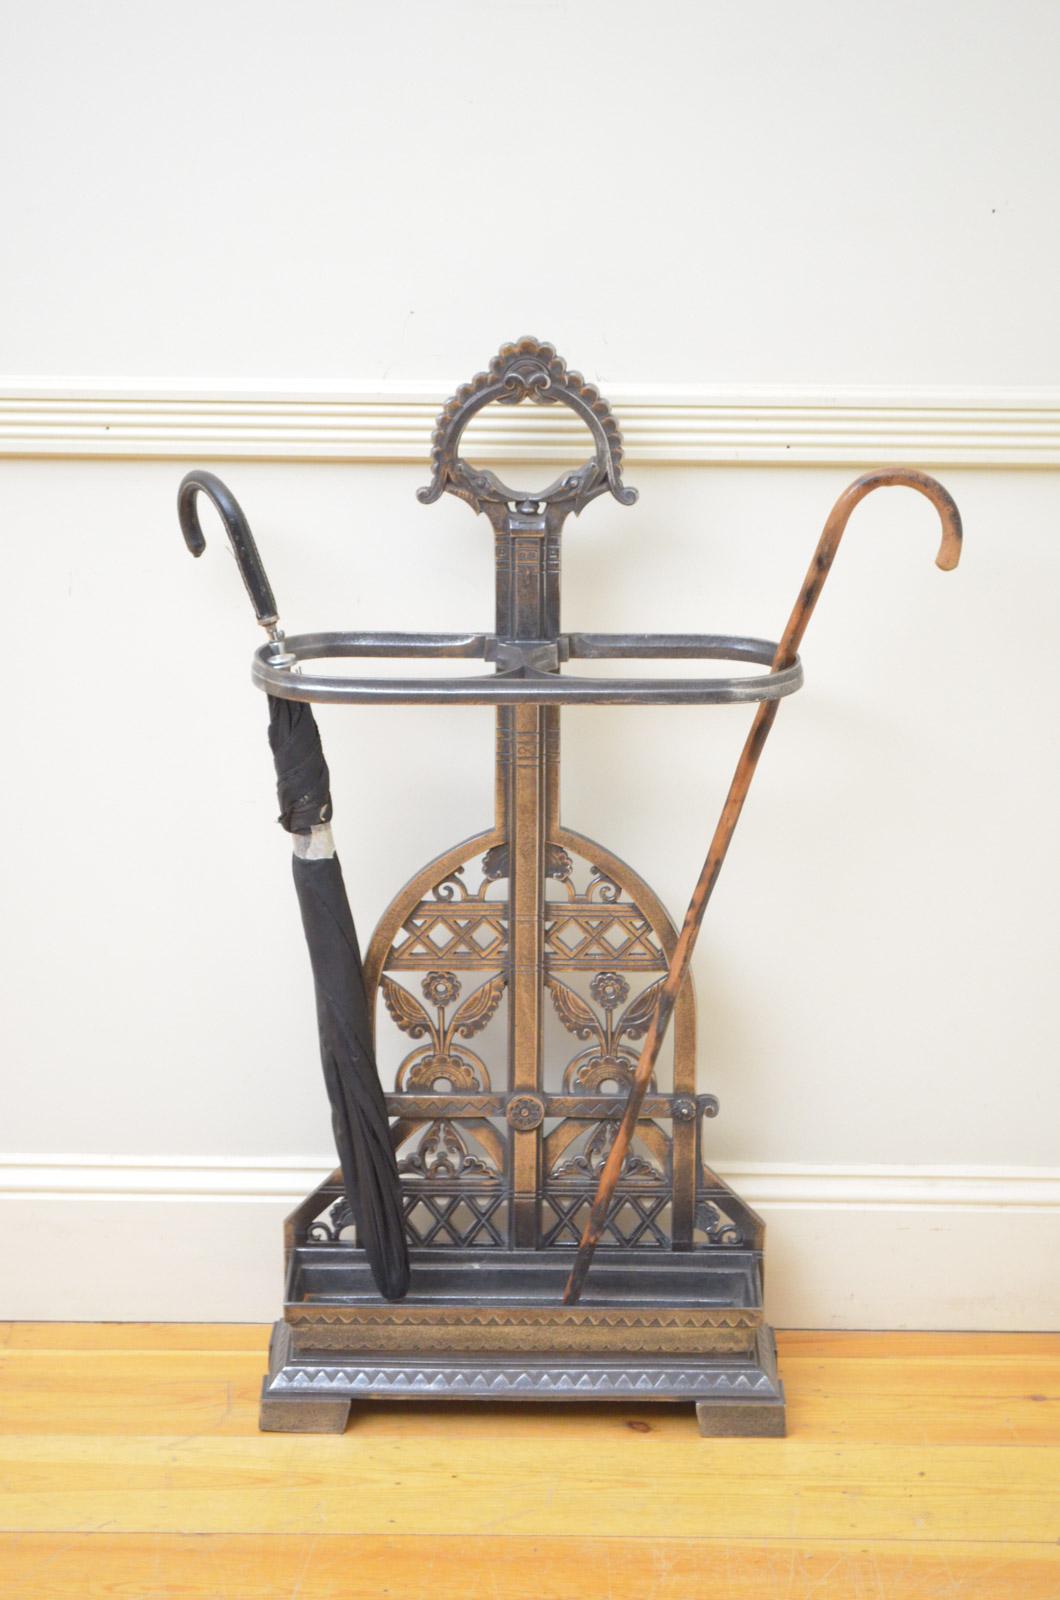 Sn4579, stylish aesthetic movement Coalbrook dale cast iron hall stand with fantastic pierced decoration throughout. Reference: Coalbrook Dale castings, Sec 11, 229, circa 1880
Measures: H 39